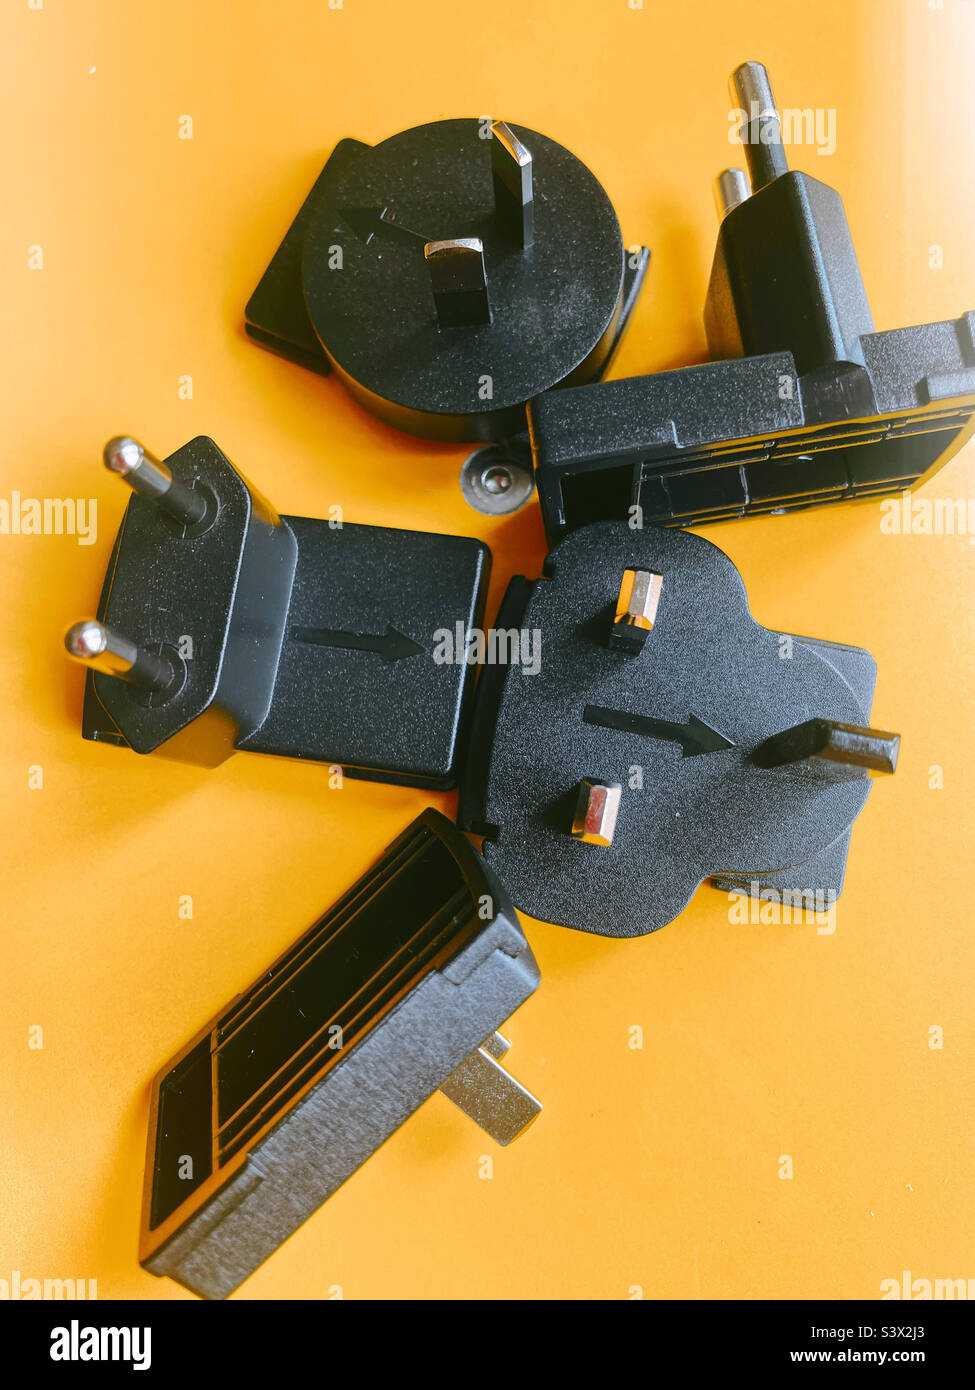 Still life of electric plug adapters Stock Photo